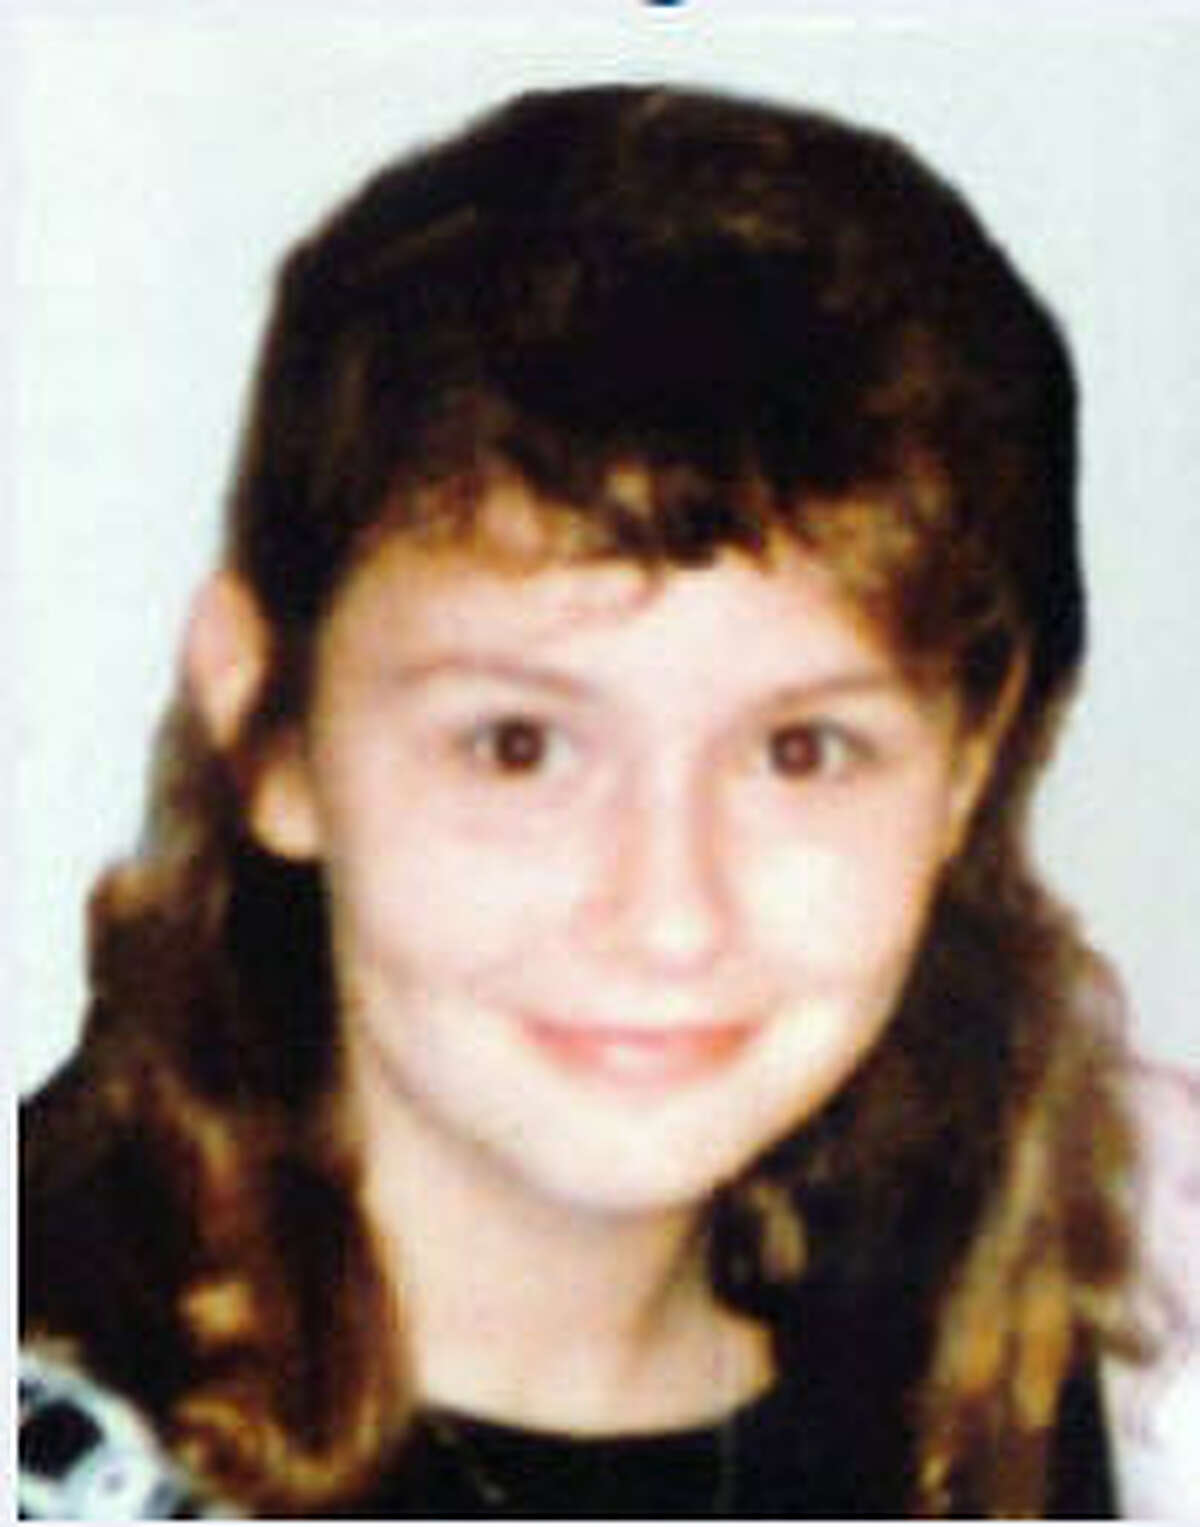 Kimberly Norwood was 12-years-old when she disappeared near her home in Hallsville, in East Texas, on May 20, 1989. The disappearance is still an open case and the Center for Missing and Exploited Children is making a push for information.